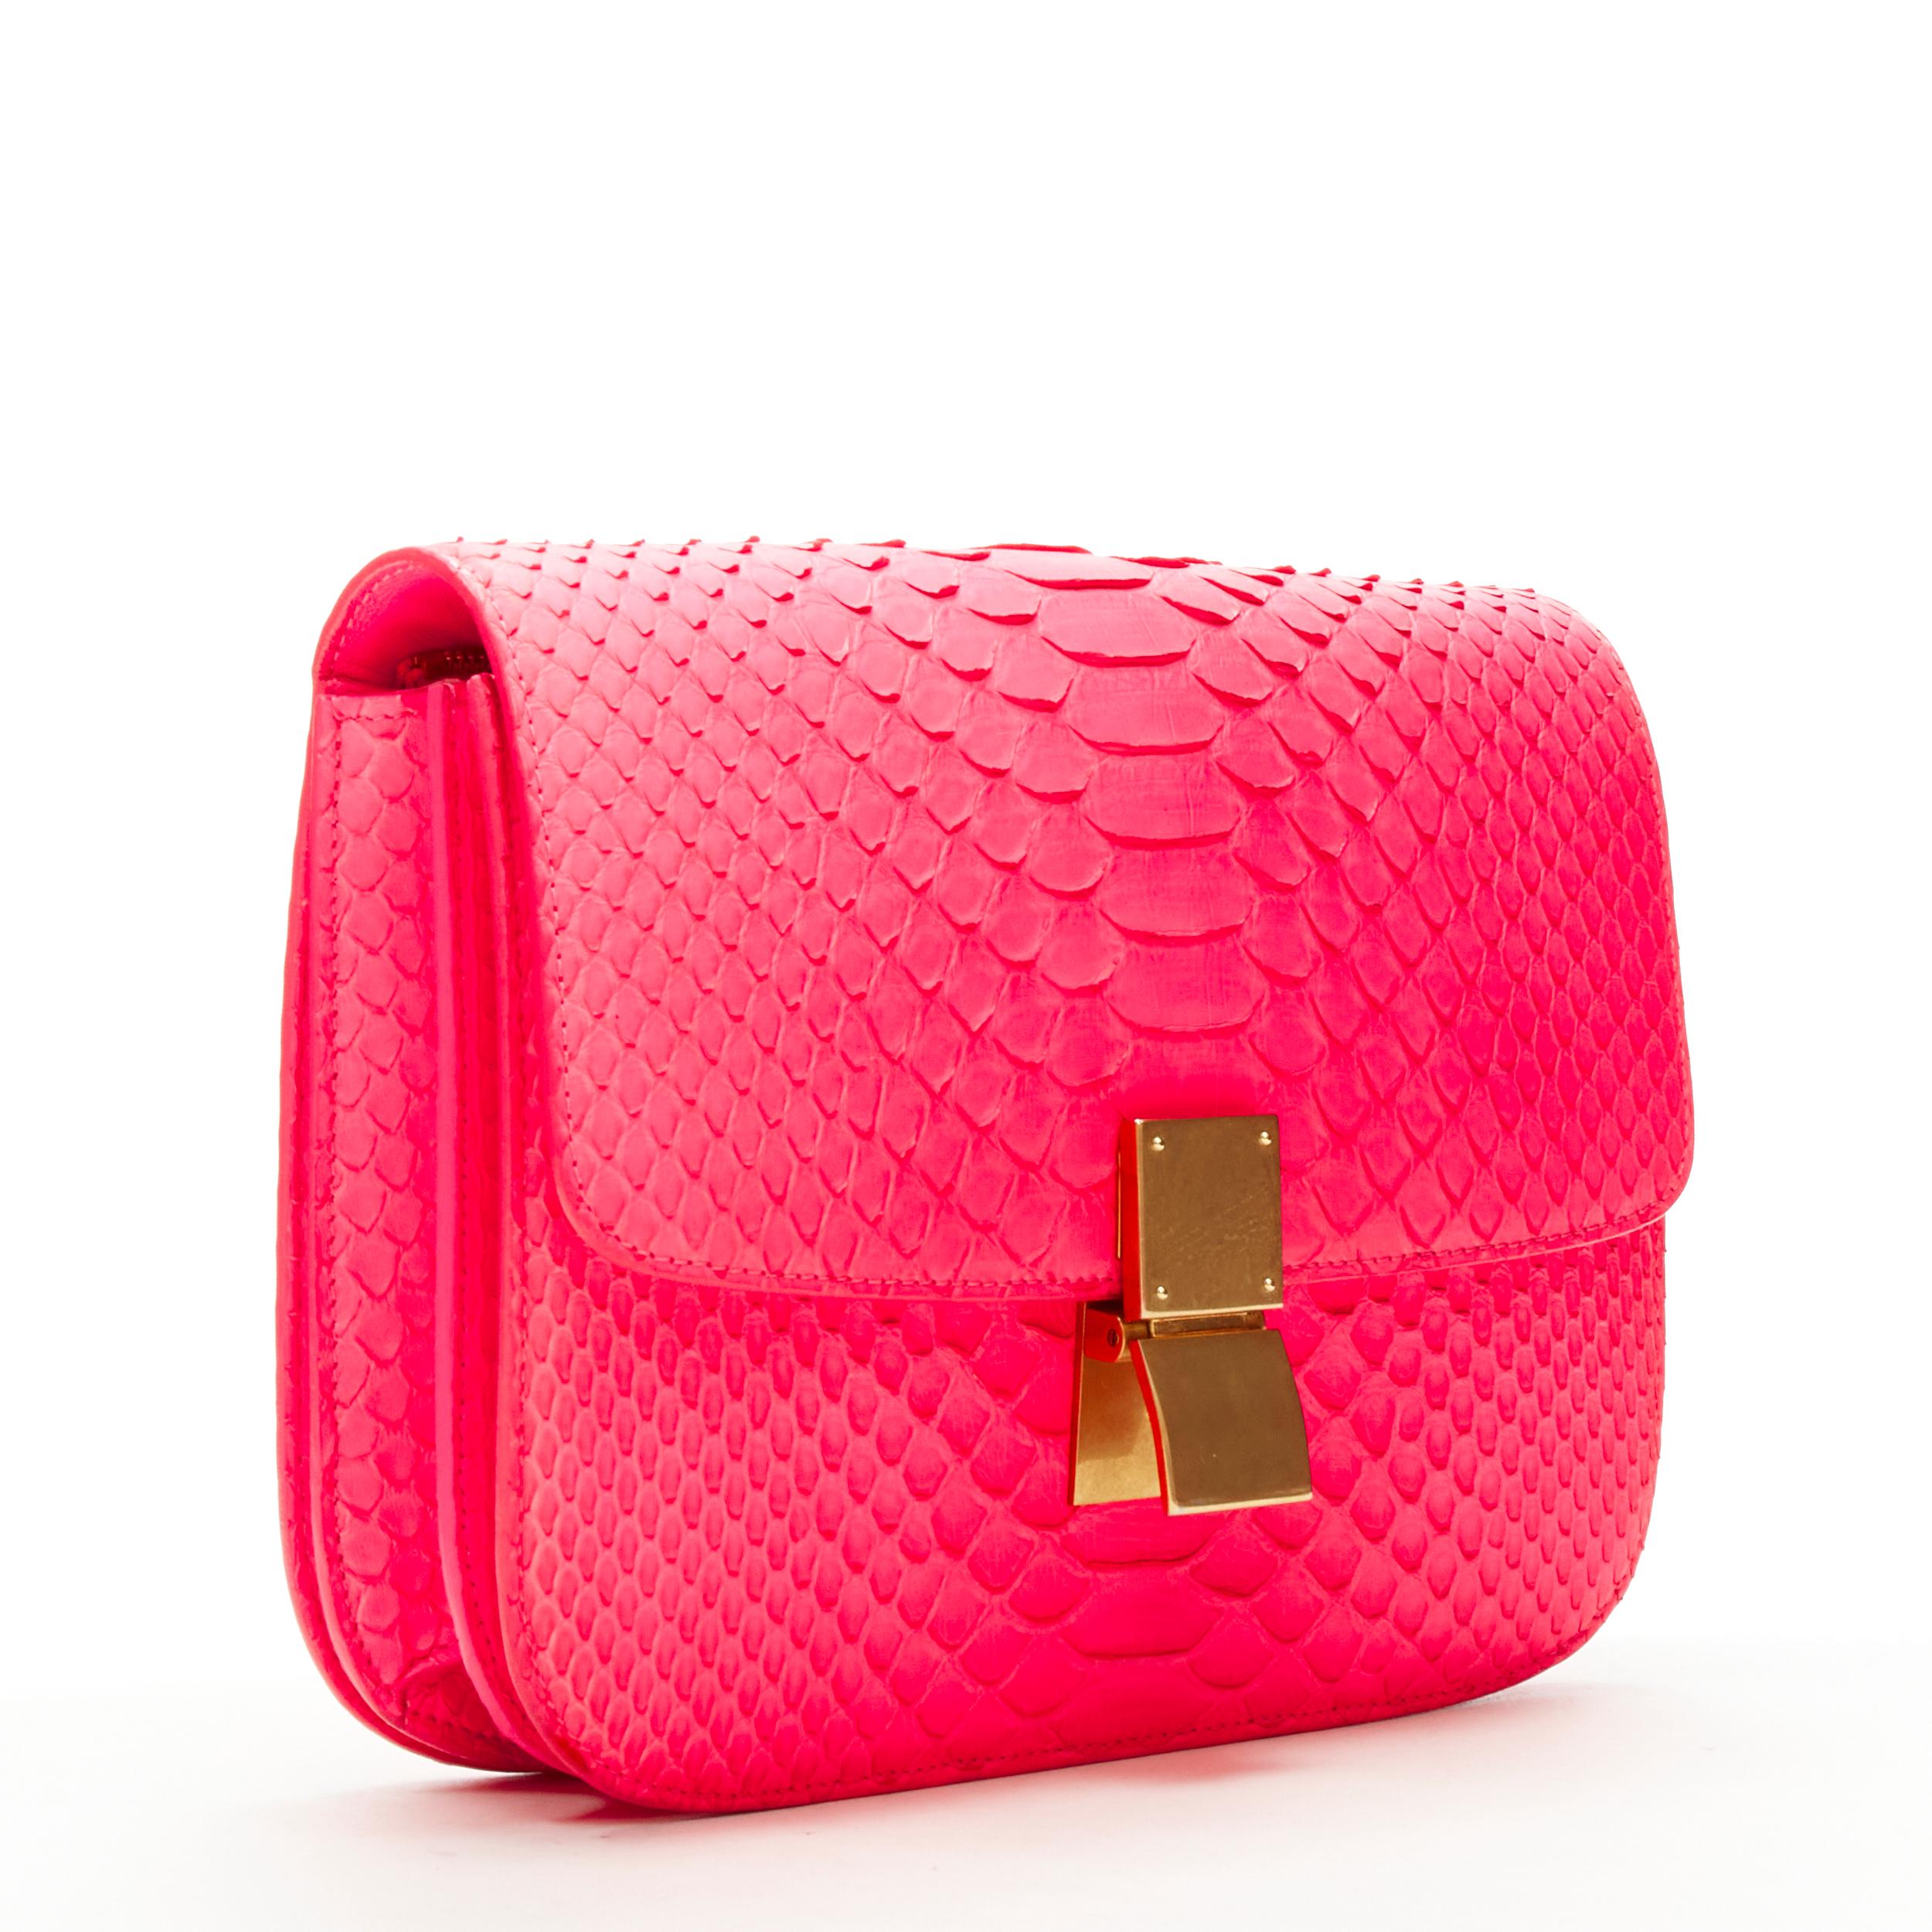 OLD CELINE Medium Classic Box Bag neon pink scaled leather flap crossbody In Excellent Condition For Sale In Hong Kong, NT